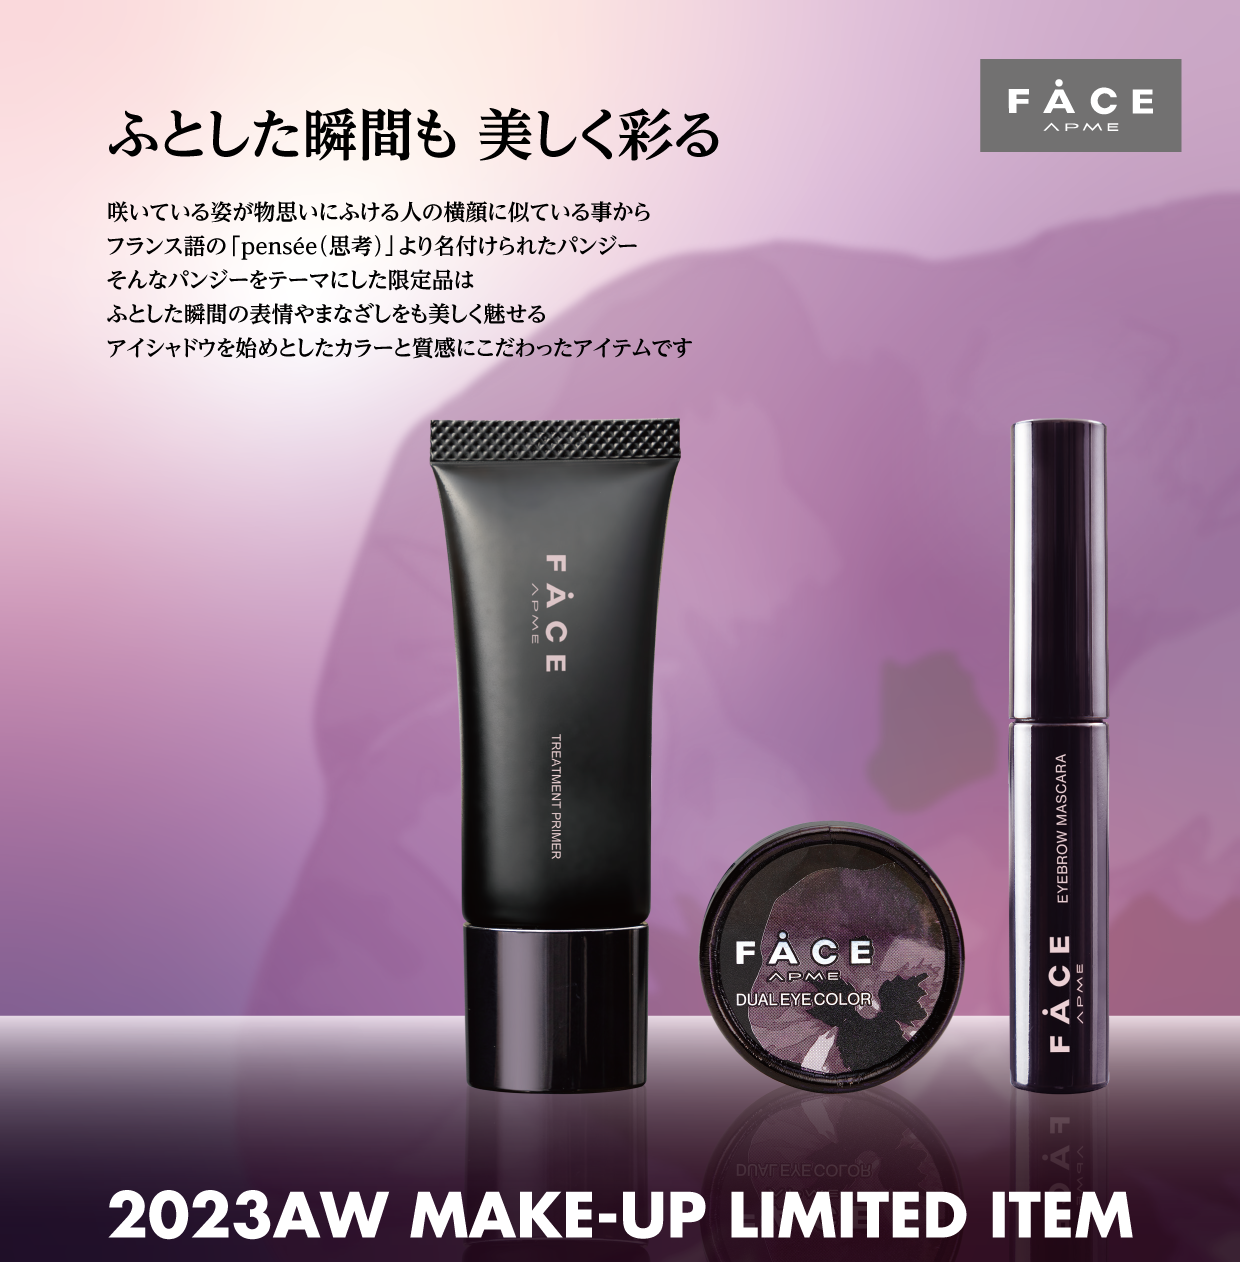 2023AW MAKE-UP LIMITED ITEM